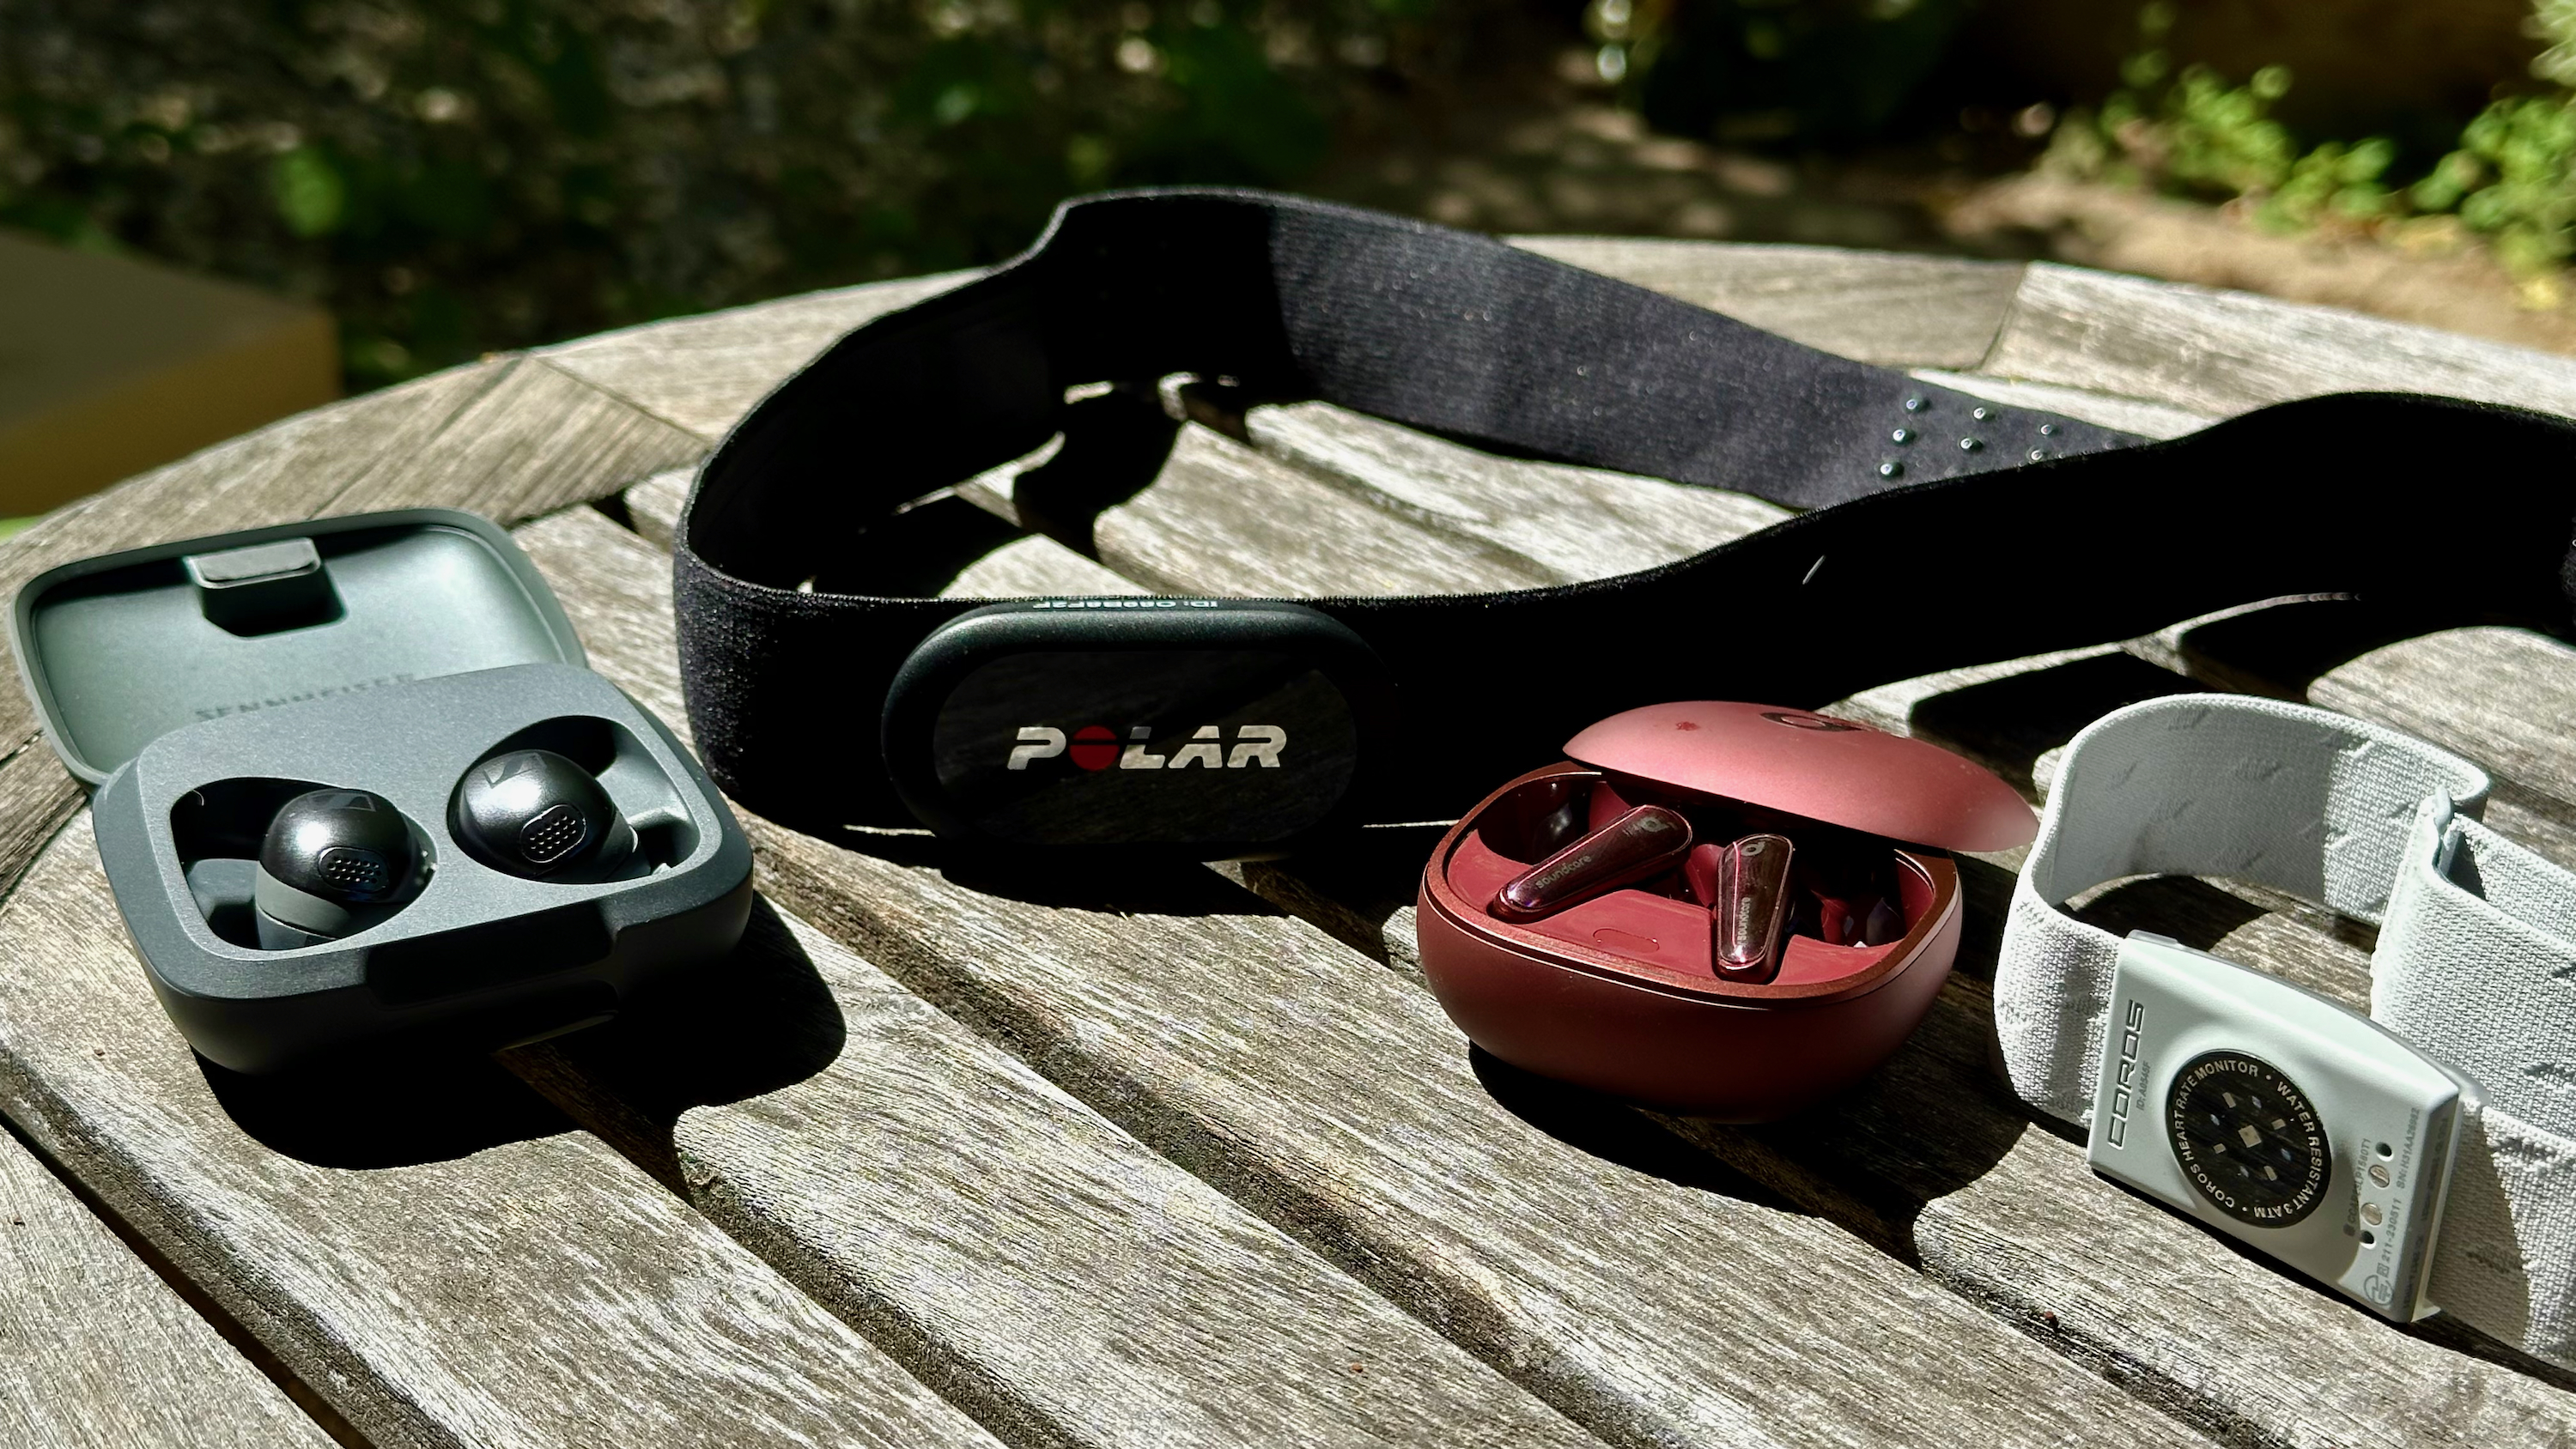 The Polar H10 and COROS Heart Rate Monitor sitting on a table next to two heart rate earbuds, the Sennheiser Momentum Sport and Anker Soundcore Liberty 4.